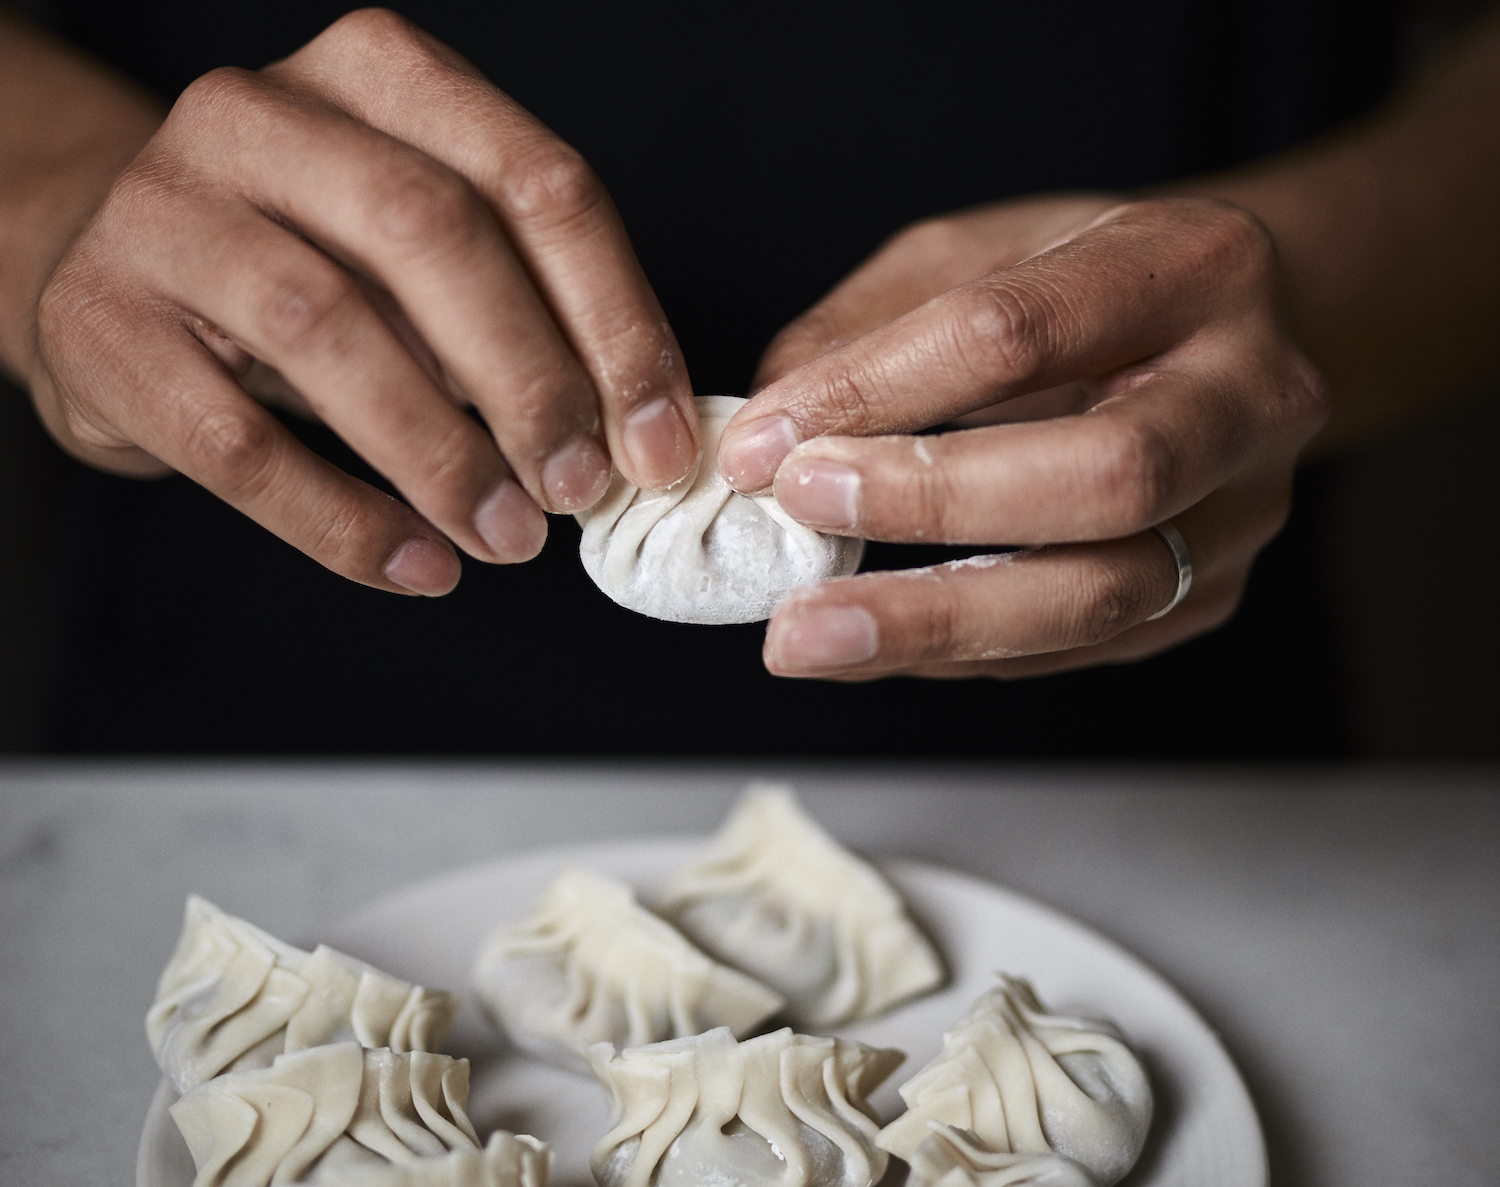 Chef Thomas Chen from Tuome makes dumplings at his home in Flushing.